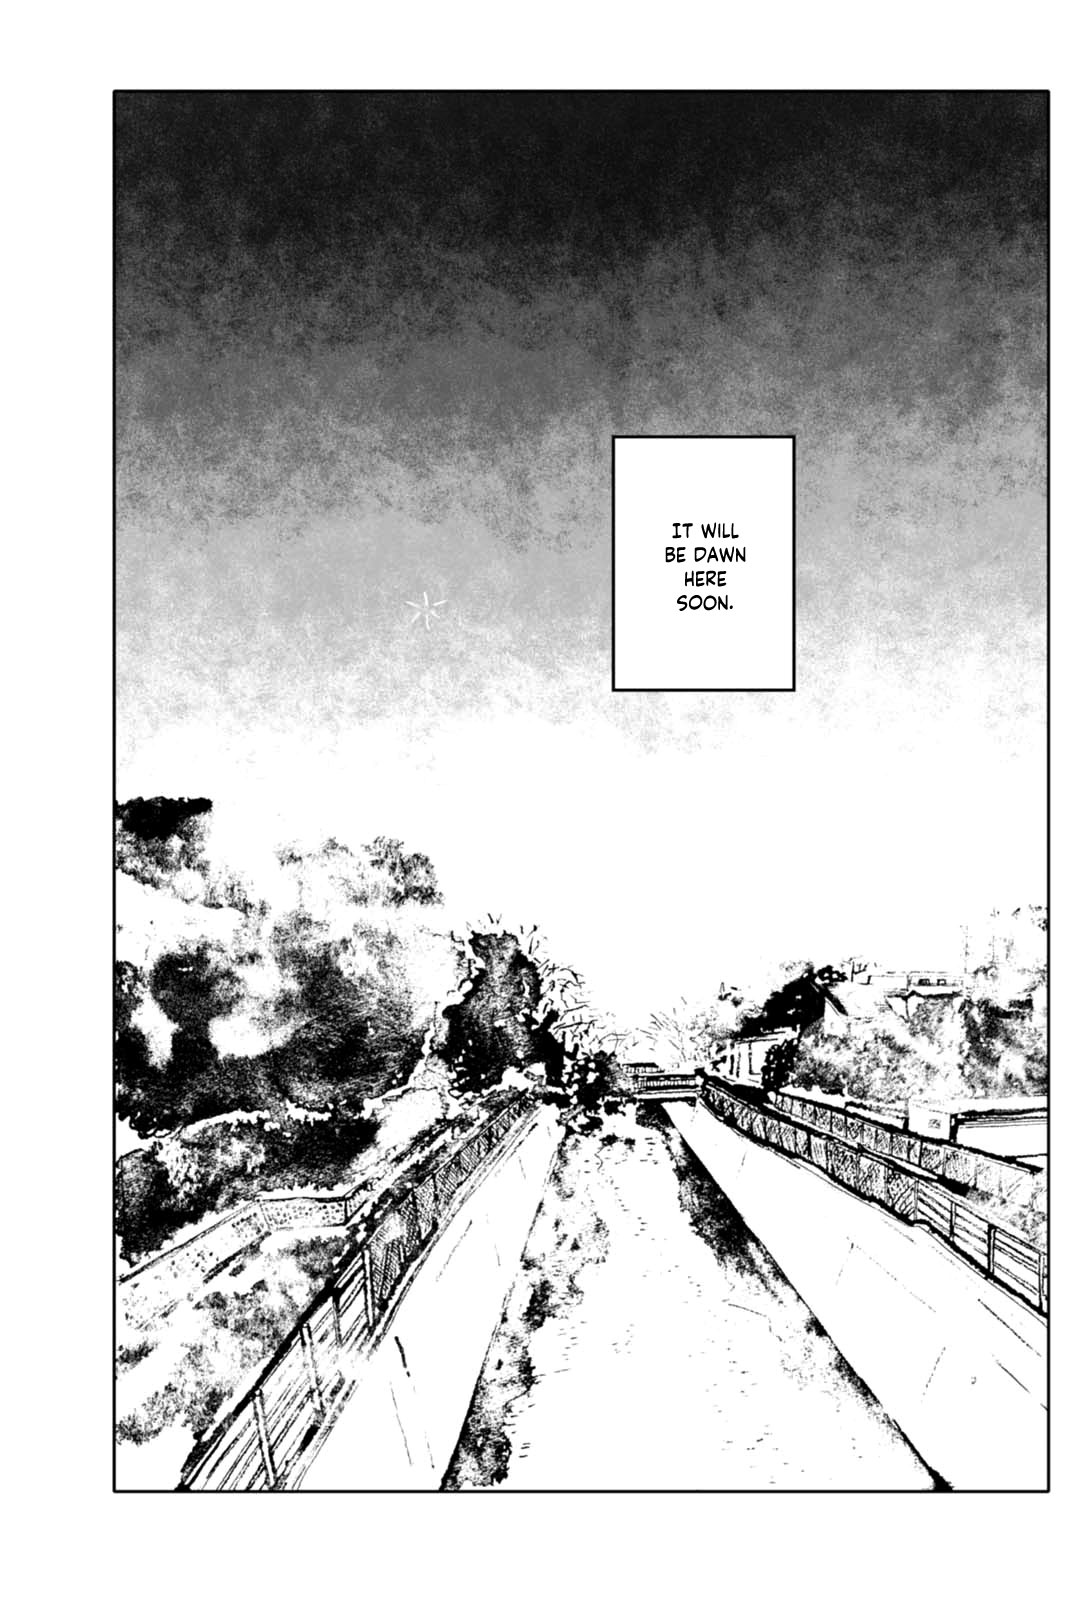 In the Night Comes a Girl Vol. 1 Ch. 7